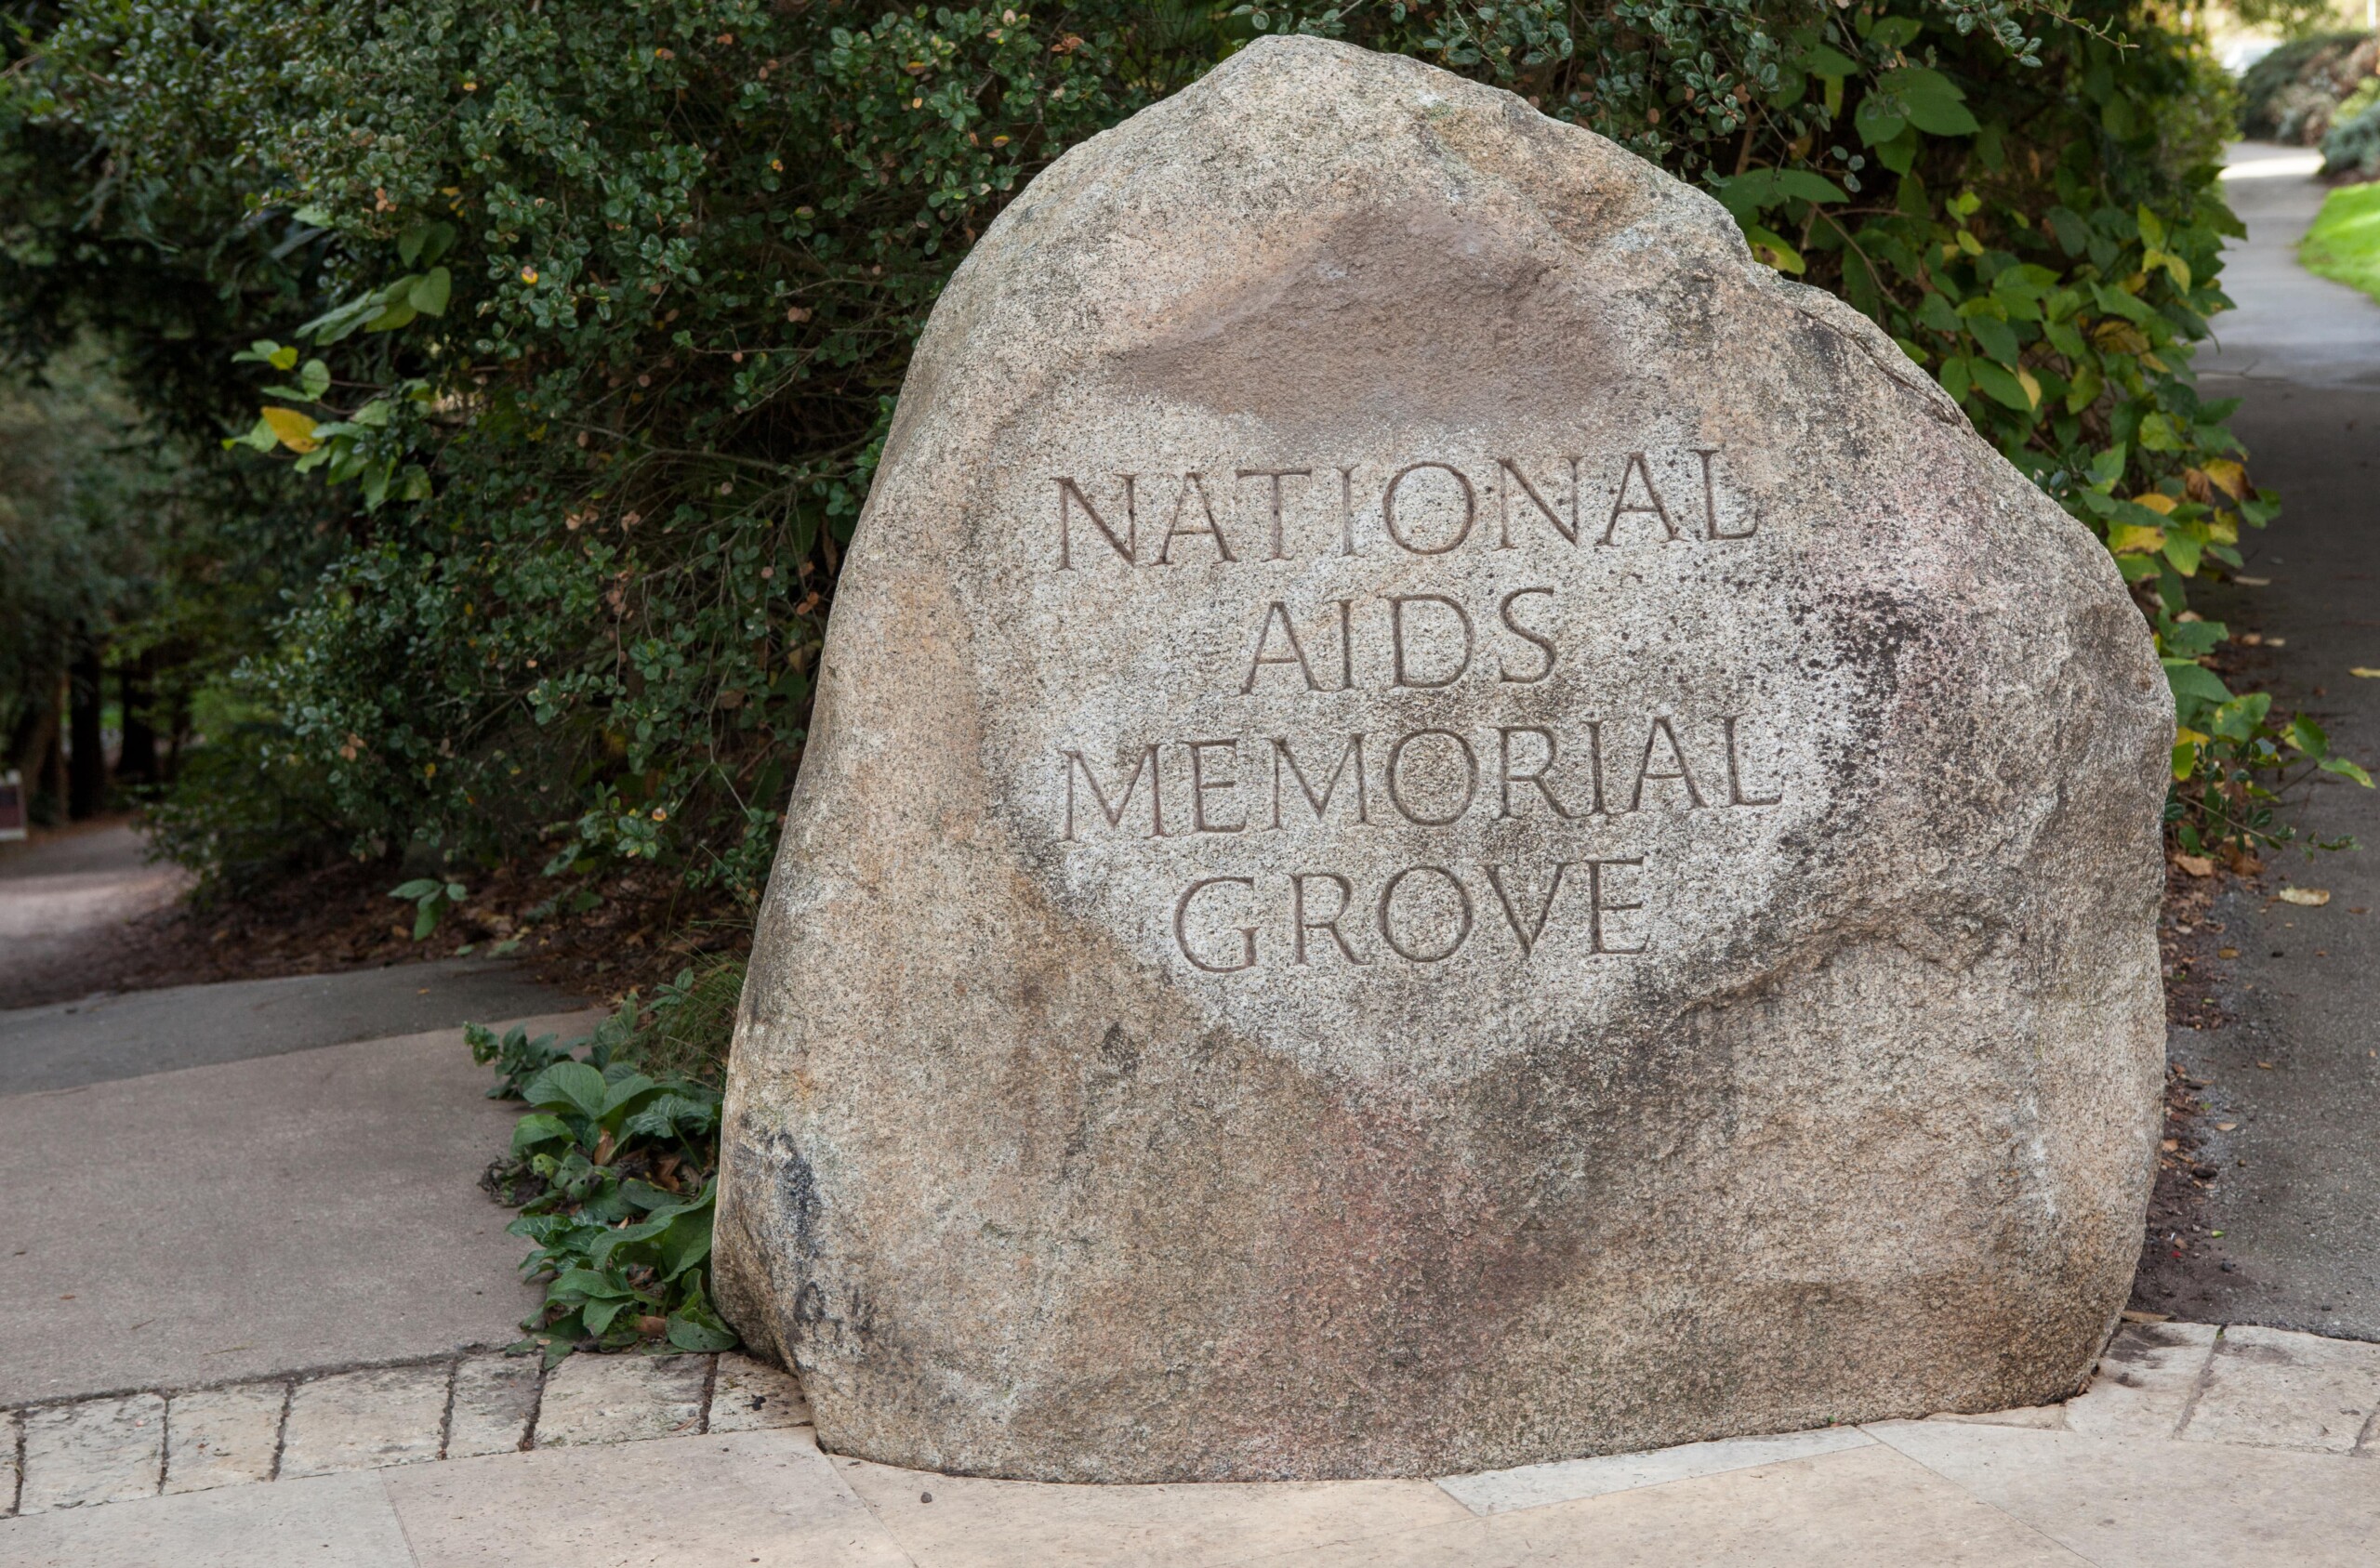 An engraved rock at the entrance to the National Aids Memorial Grove in San Francisco